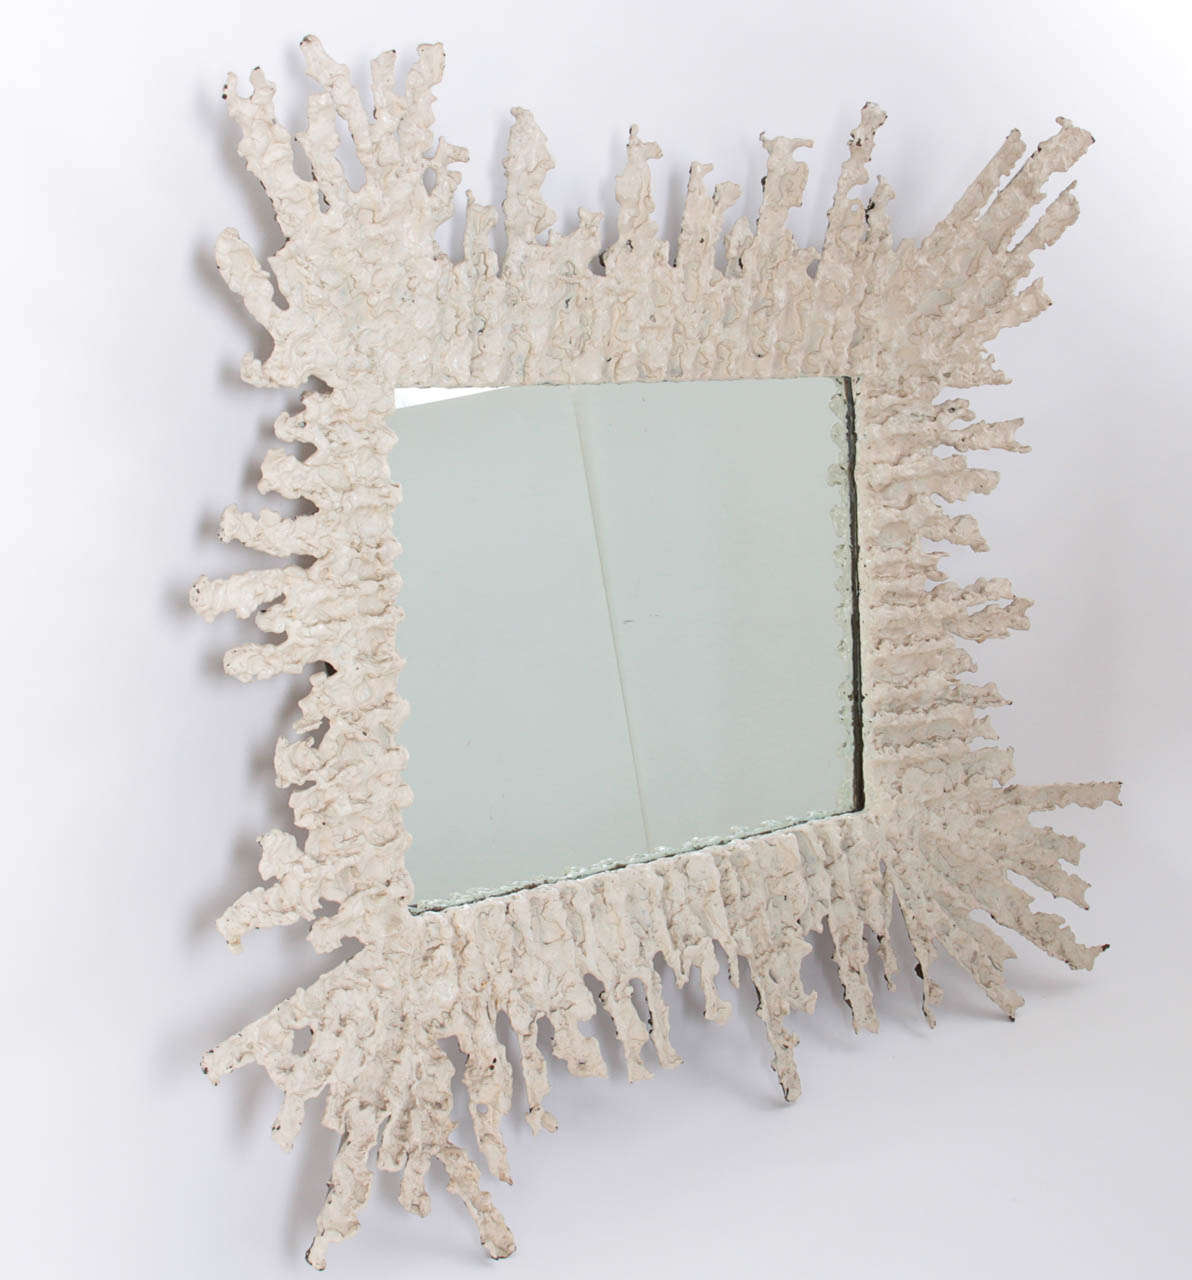 Marcello Fantoni (1915-2011) Italy

Starburst mirror 1950s

Torched bronze and original white plaster painted finish.

Marks: Fantoni, Firenze, Italy (hand script)

***This mirror has great style and character.

Overall dimension: H: 26